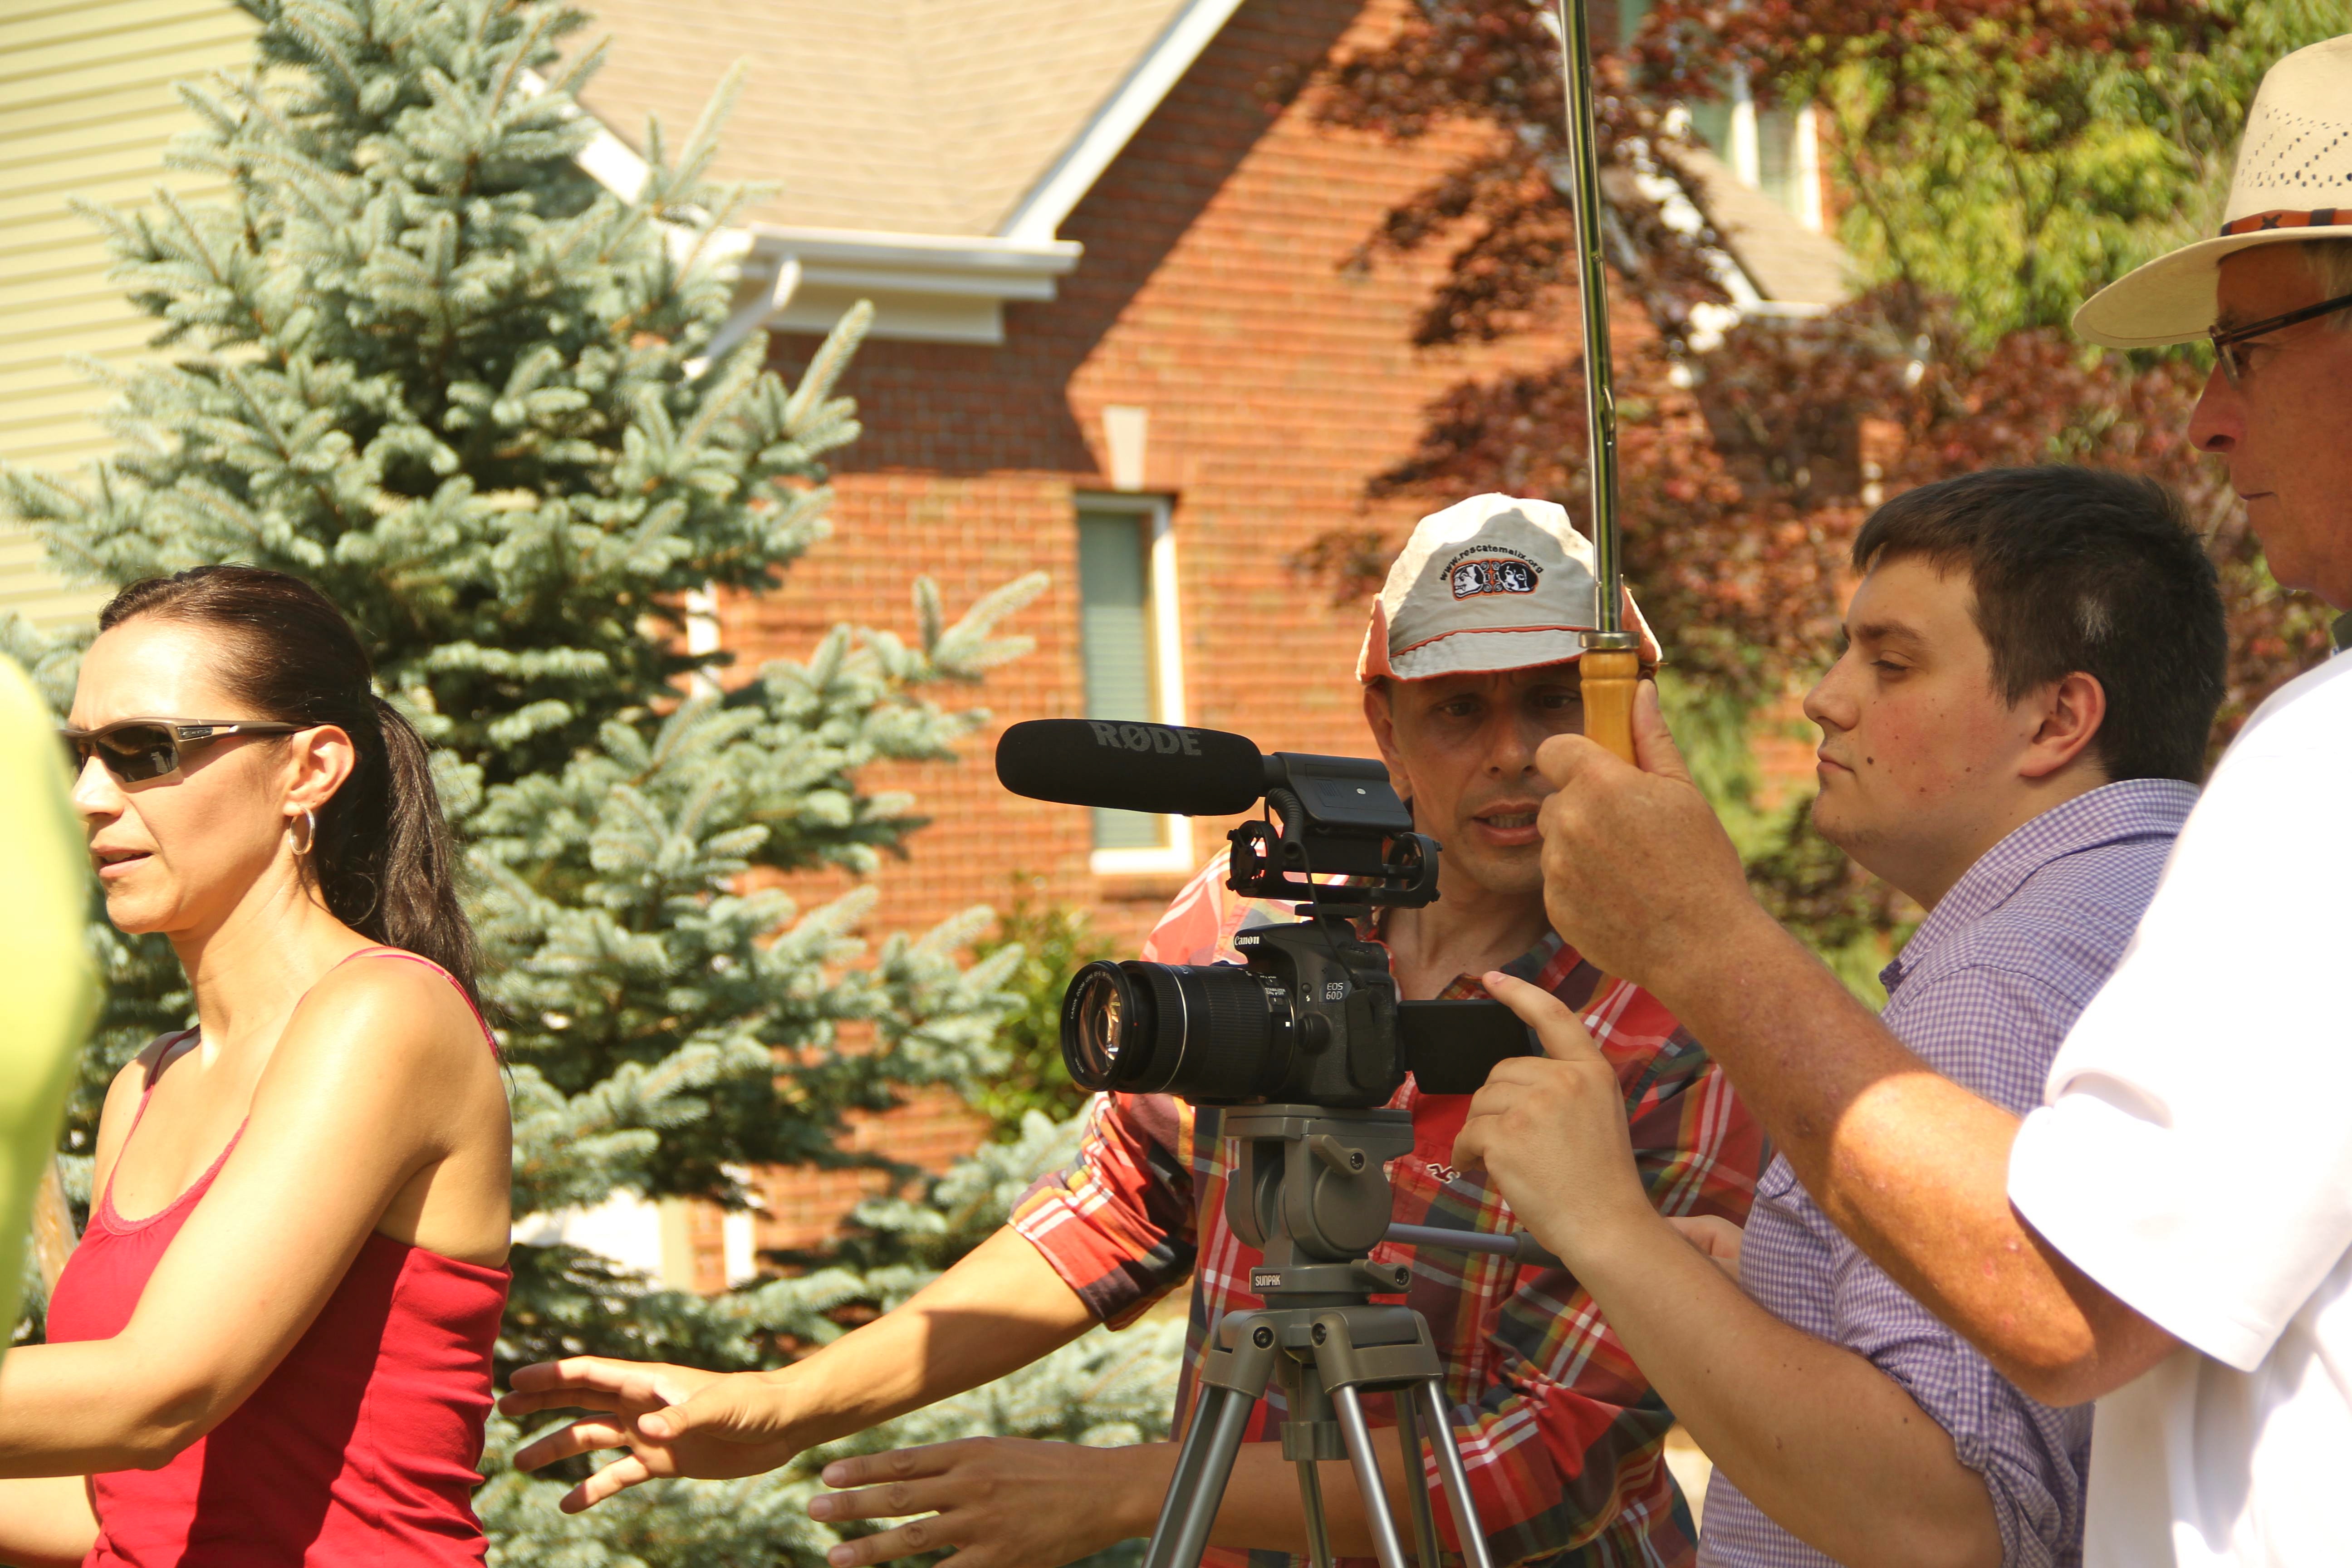 Directing a :30 sec. ad for Keller Williams Real Estate ;)